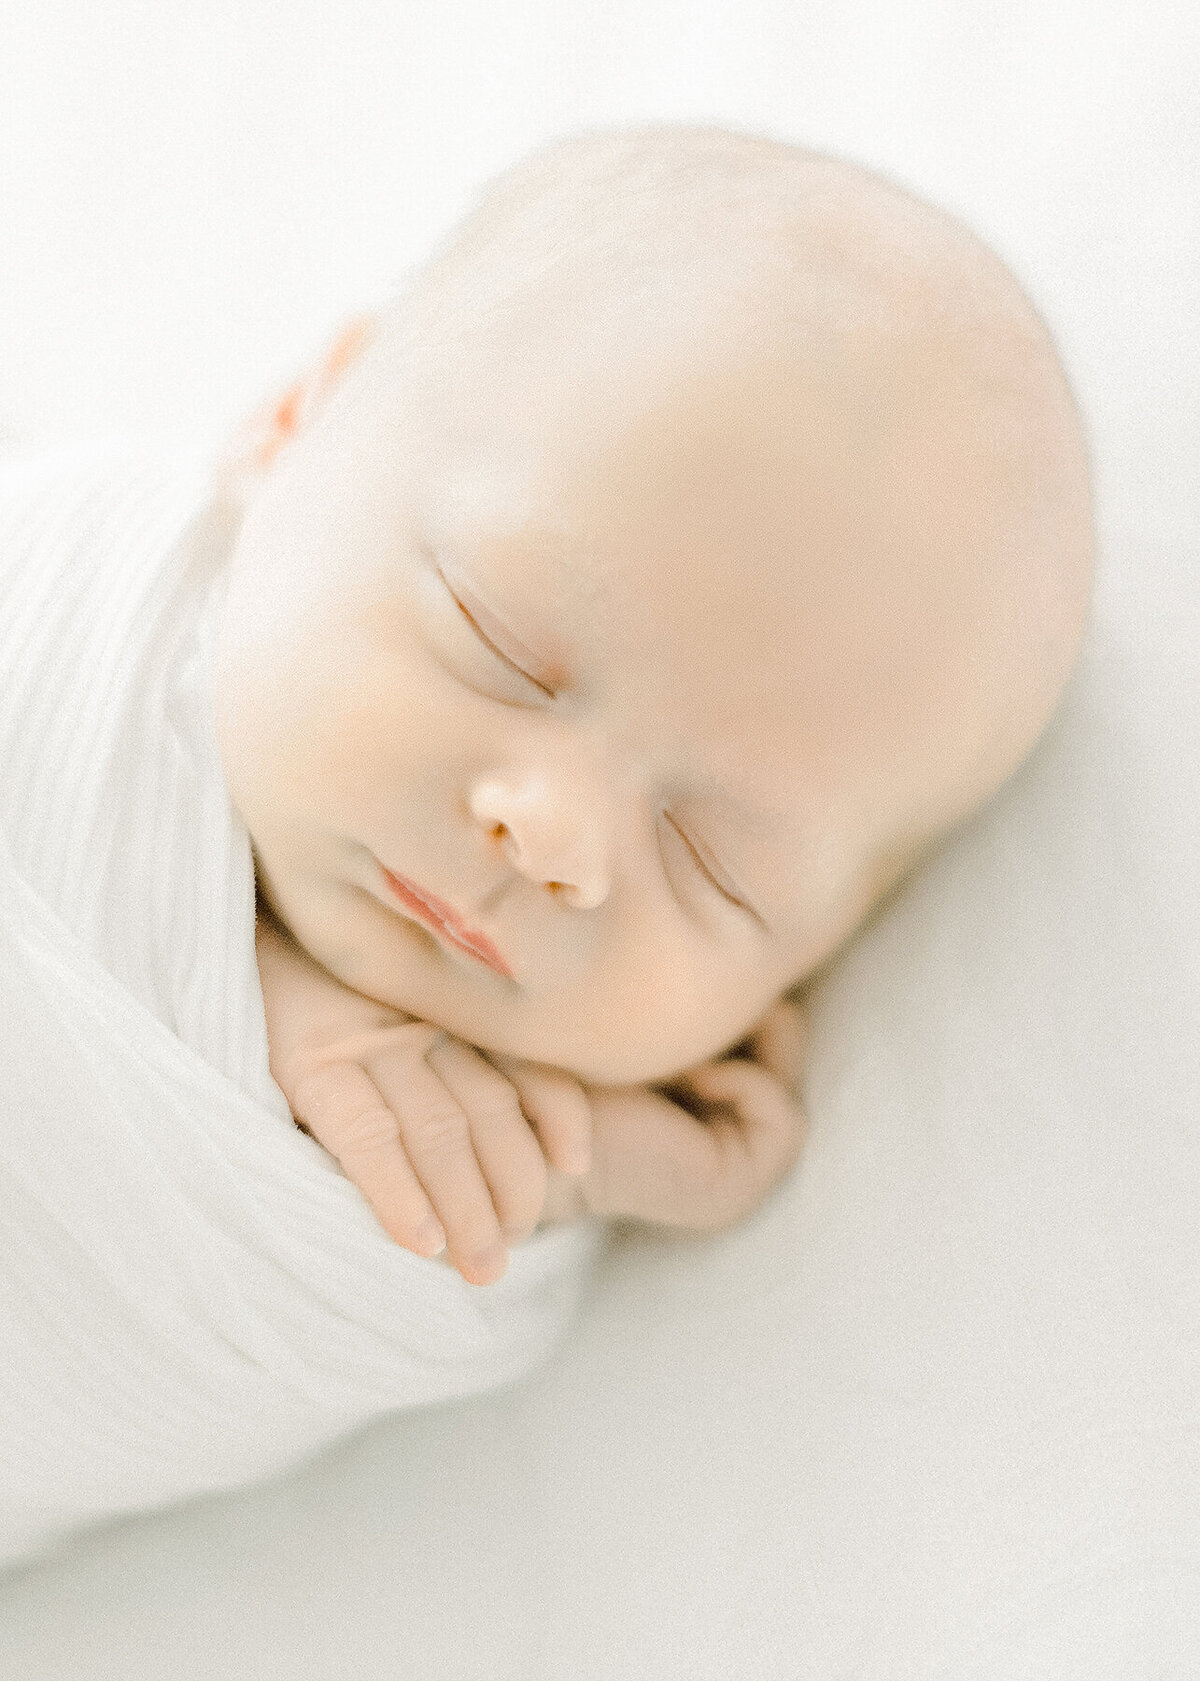 Close up detail photo of a newborn baby boy snuggled and wrapped as he sleeps with his hands by his face.